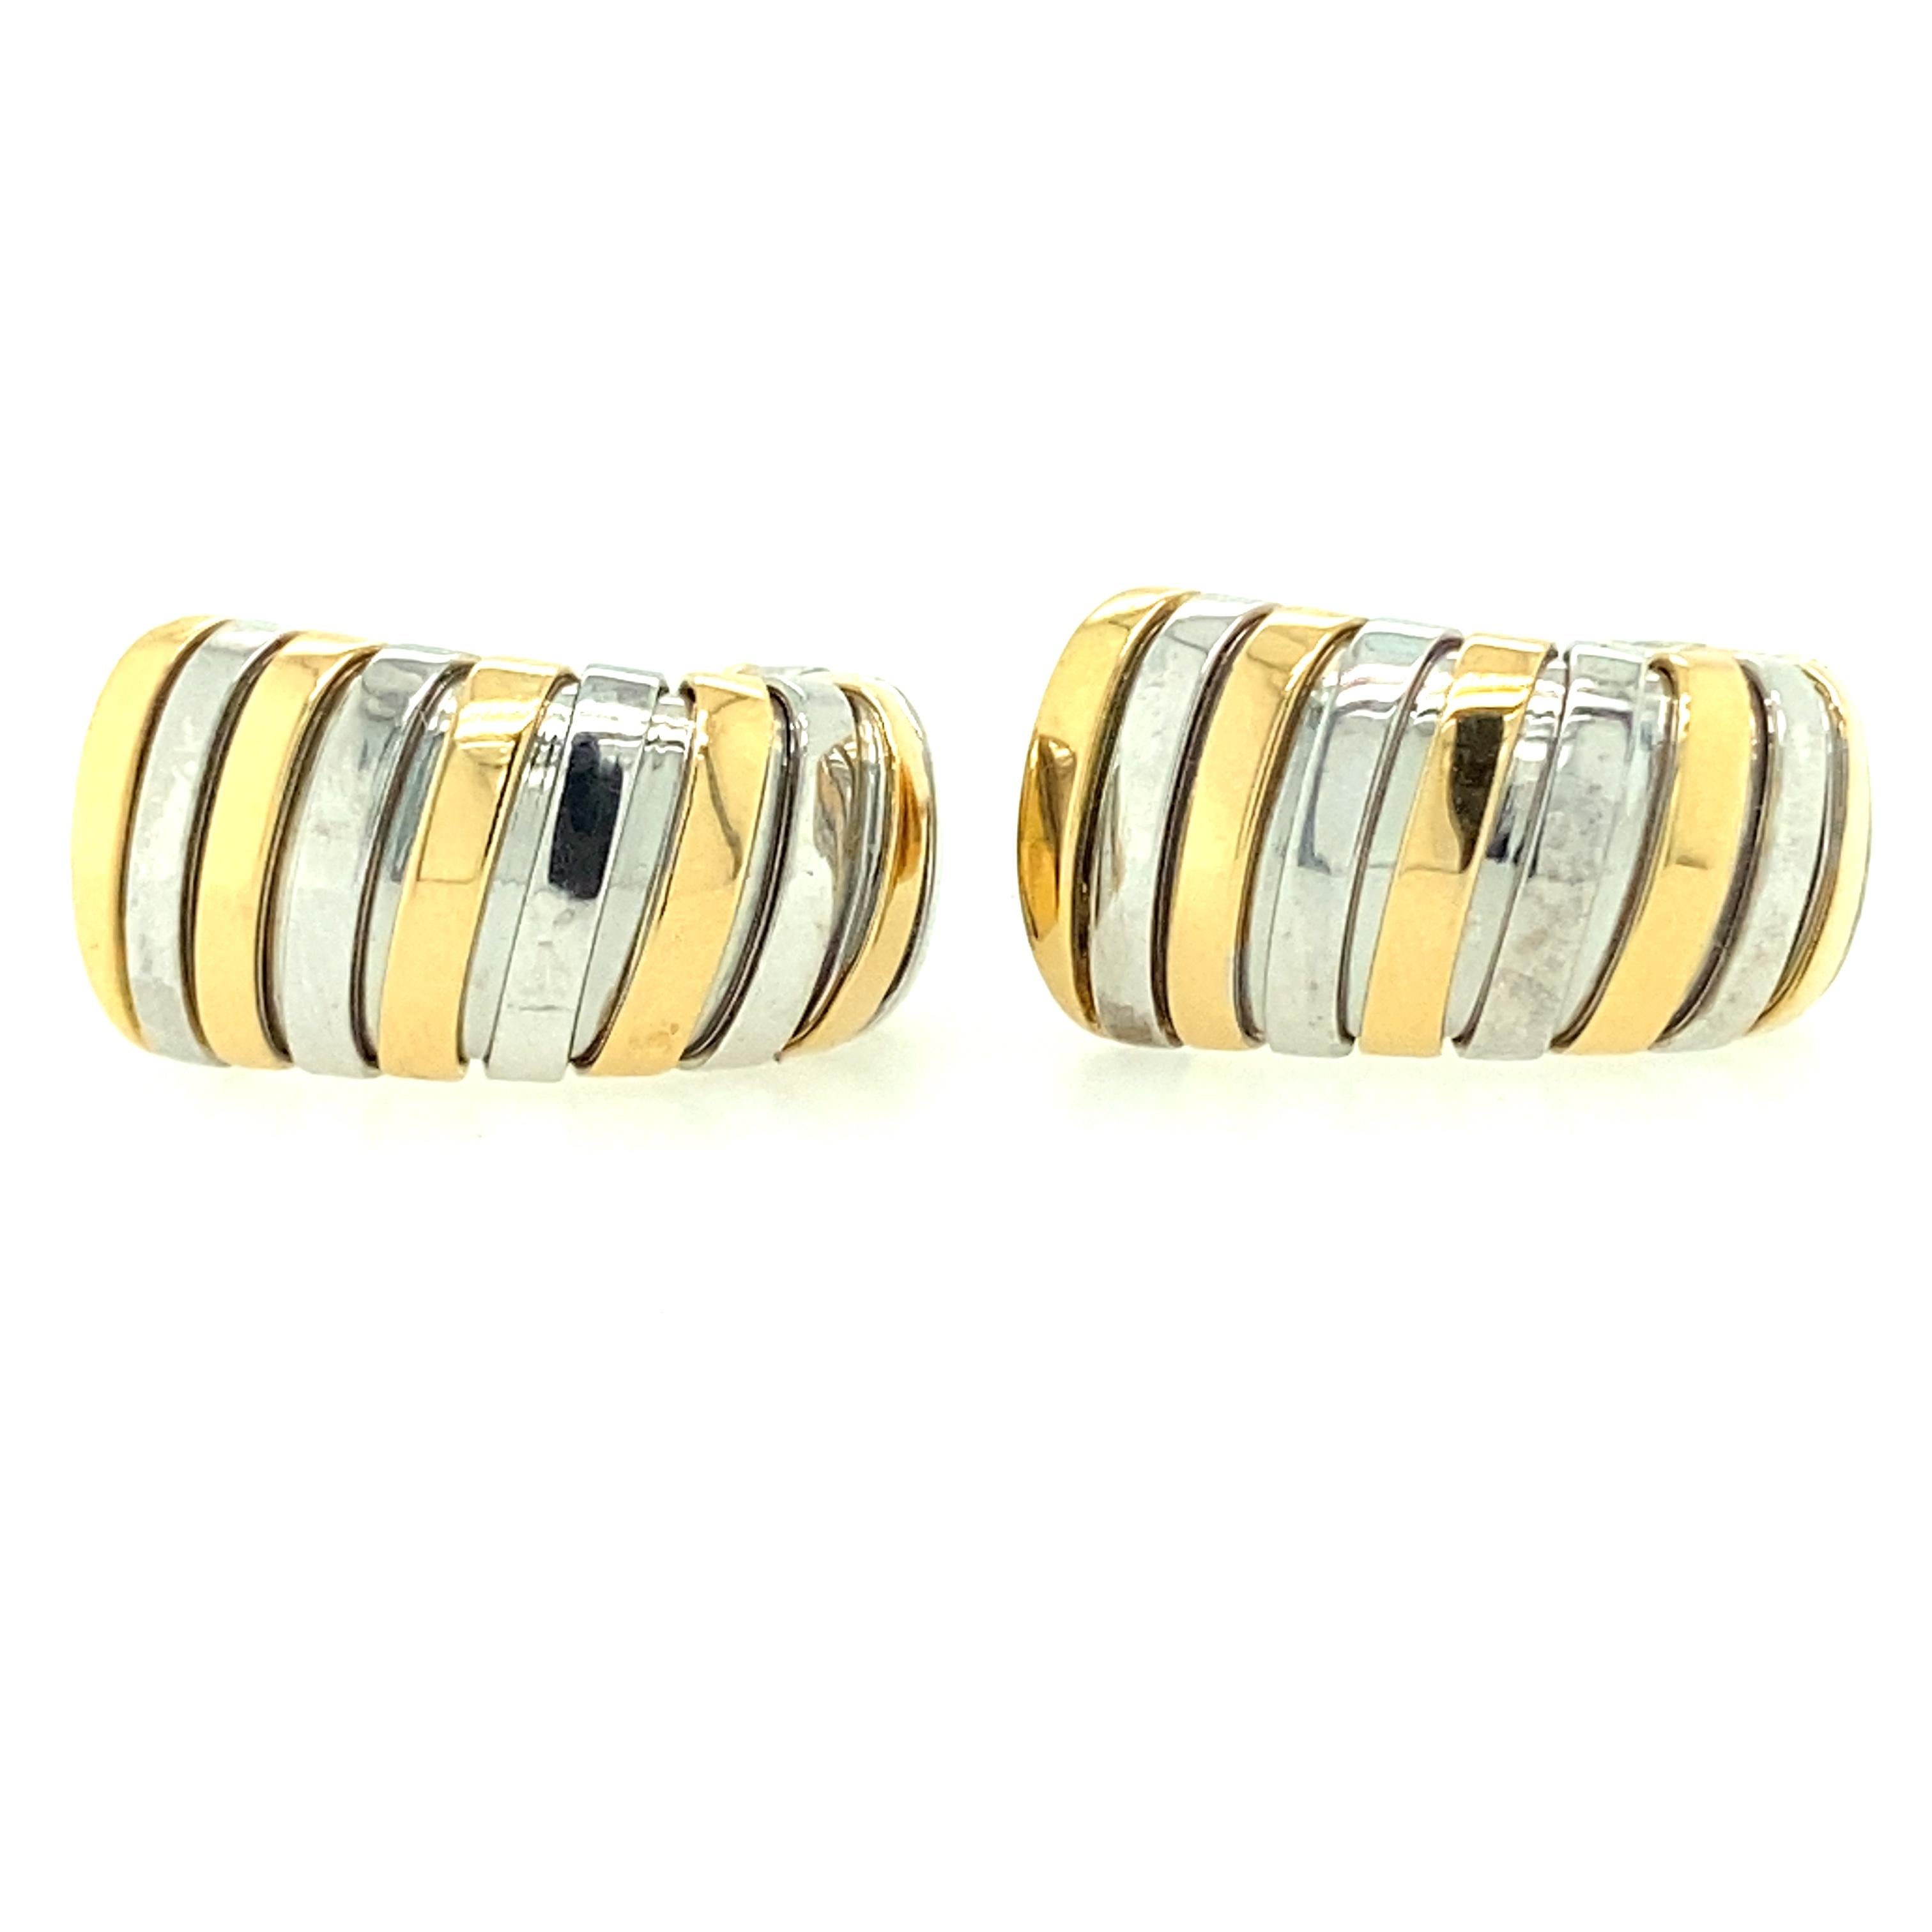 One pair of 18 karat yellow and stainless steel high polished Bvlgari earrings from the Tubogas collection (stamped 2337 AL,  750,  MADE IN ITALY). The earrings measure 23.07mm long and taper from 12.08-10.73MM wide. The earrings feature posts with